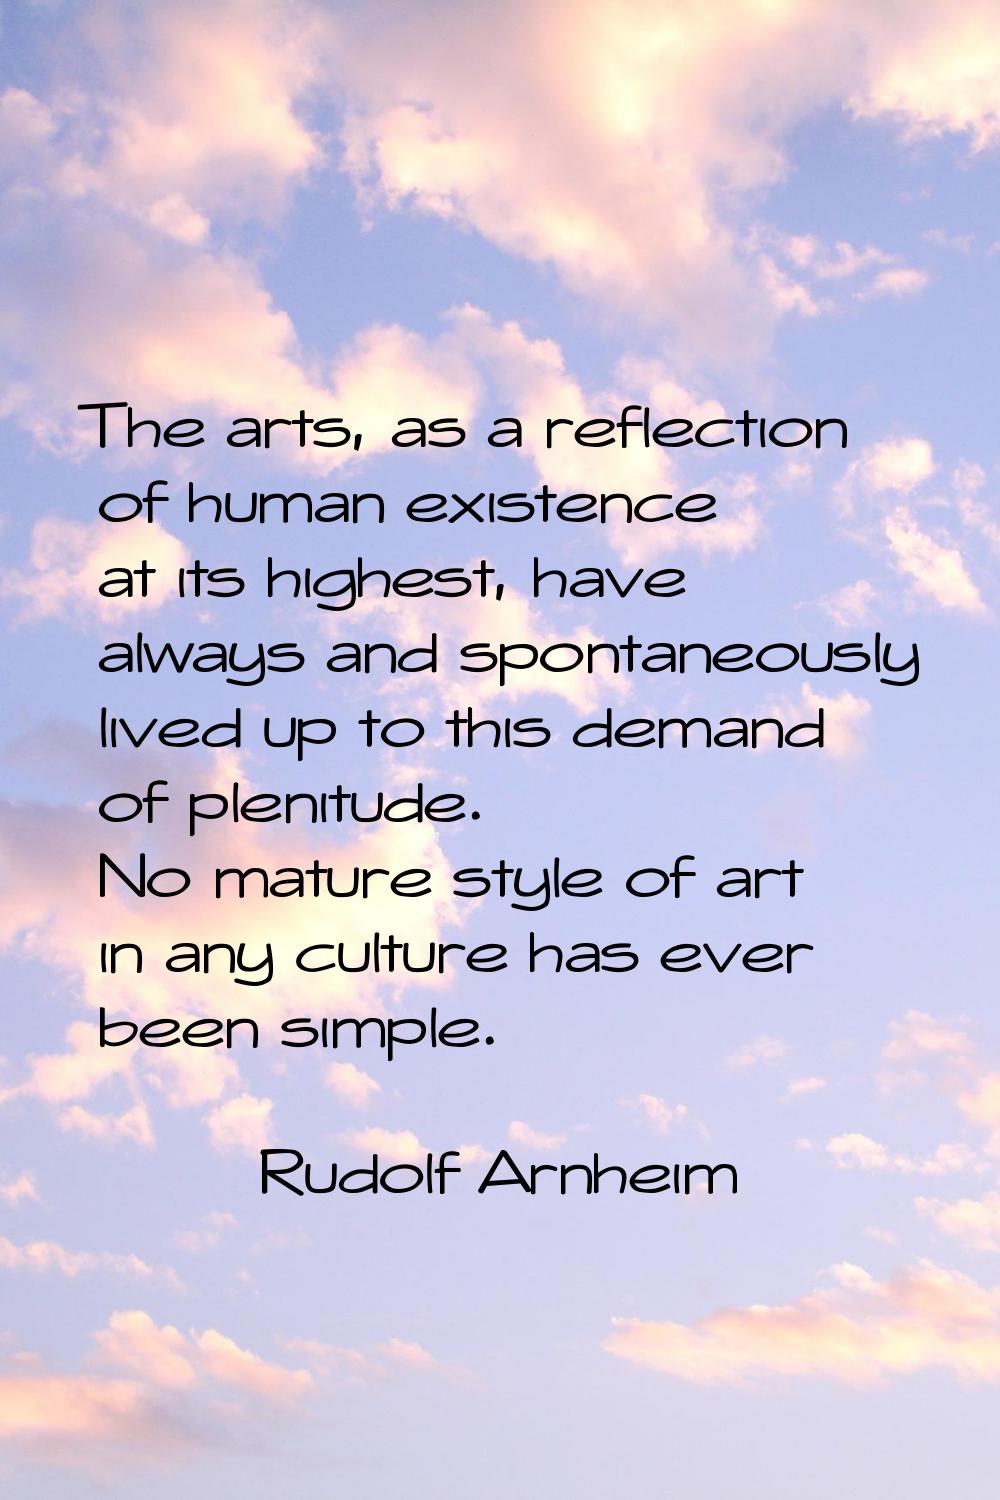 The arts, as a reflection of human existence at its highest, have always and spontaneously lived up